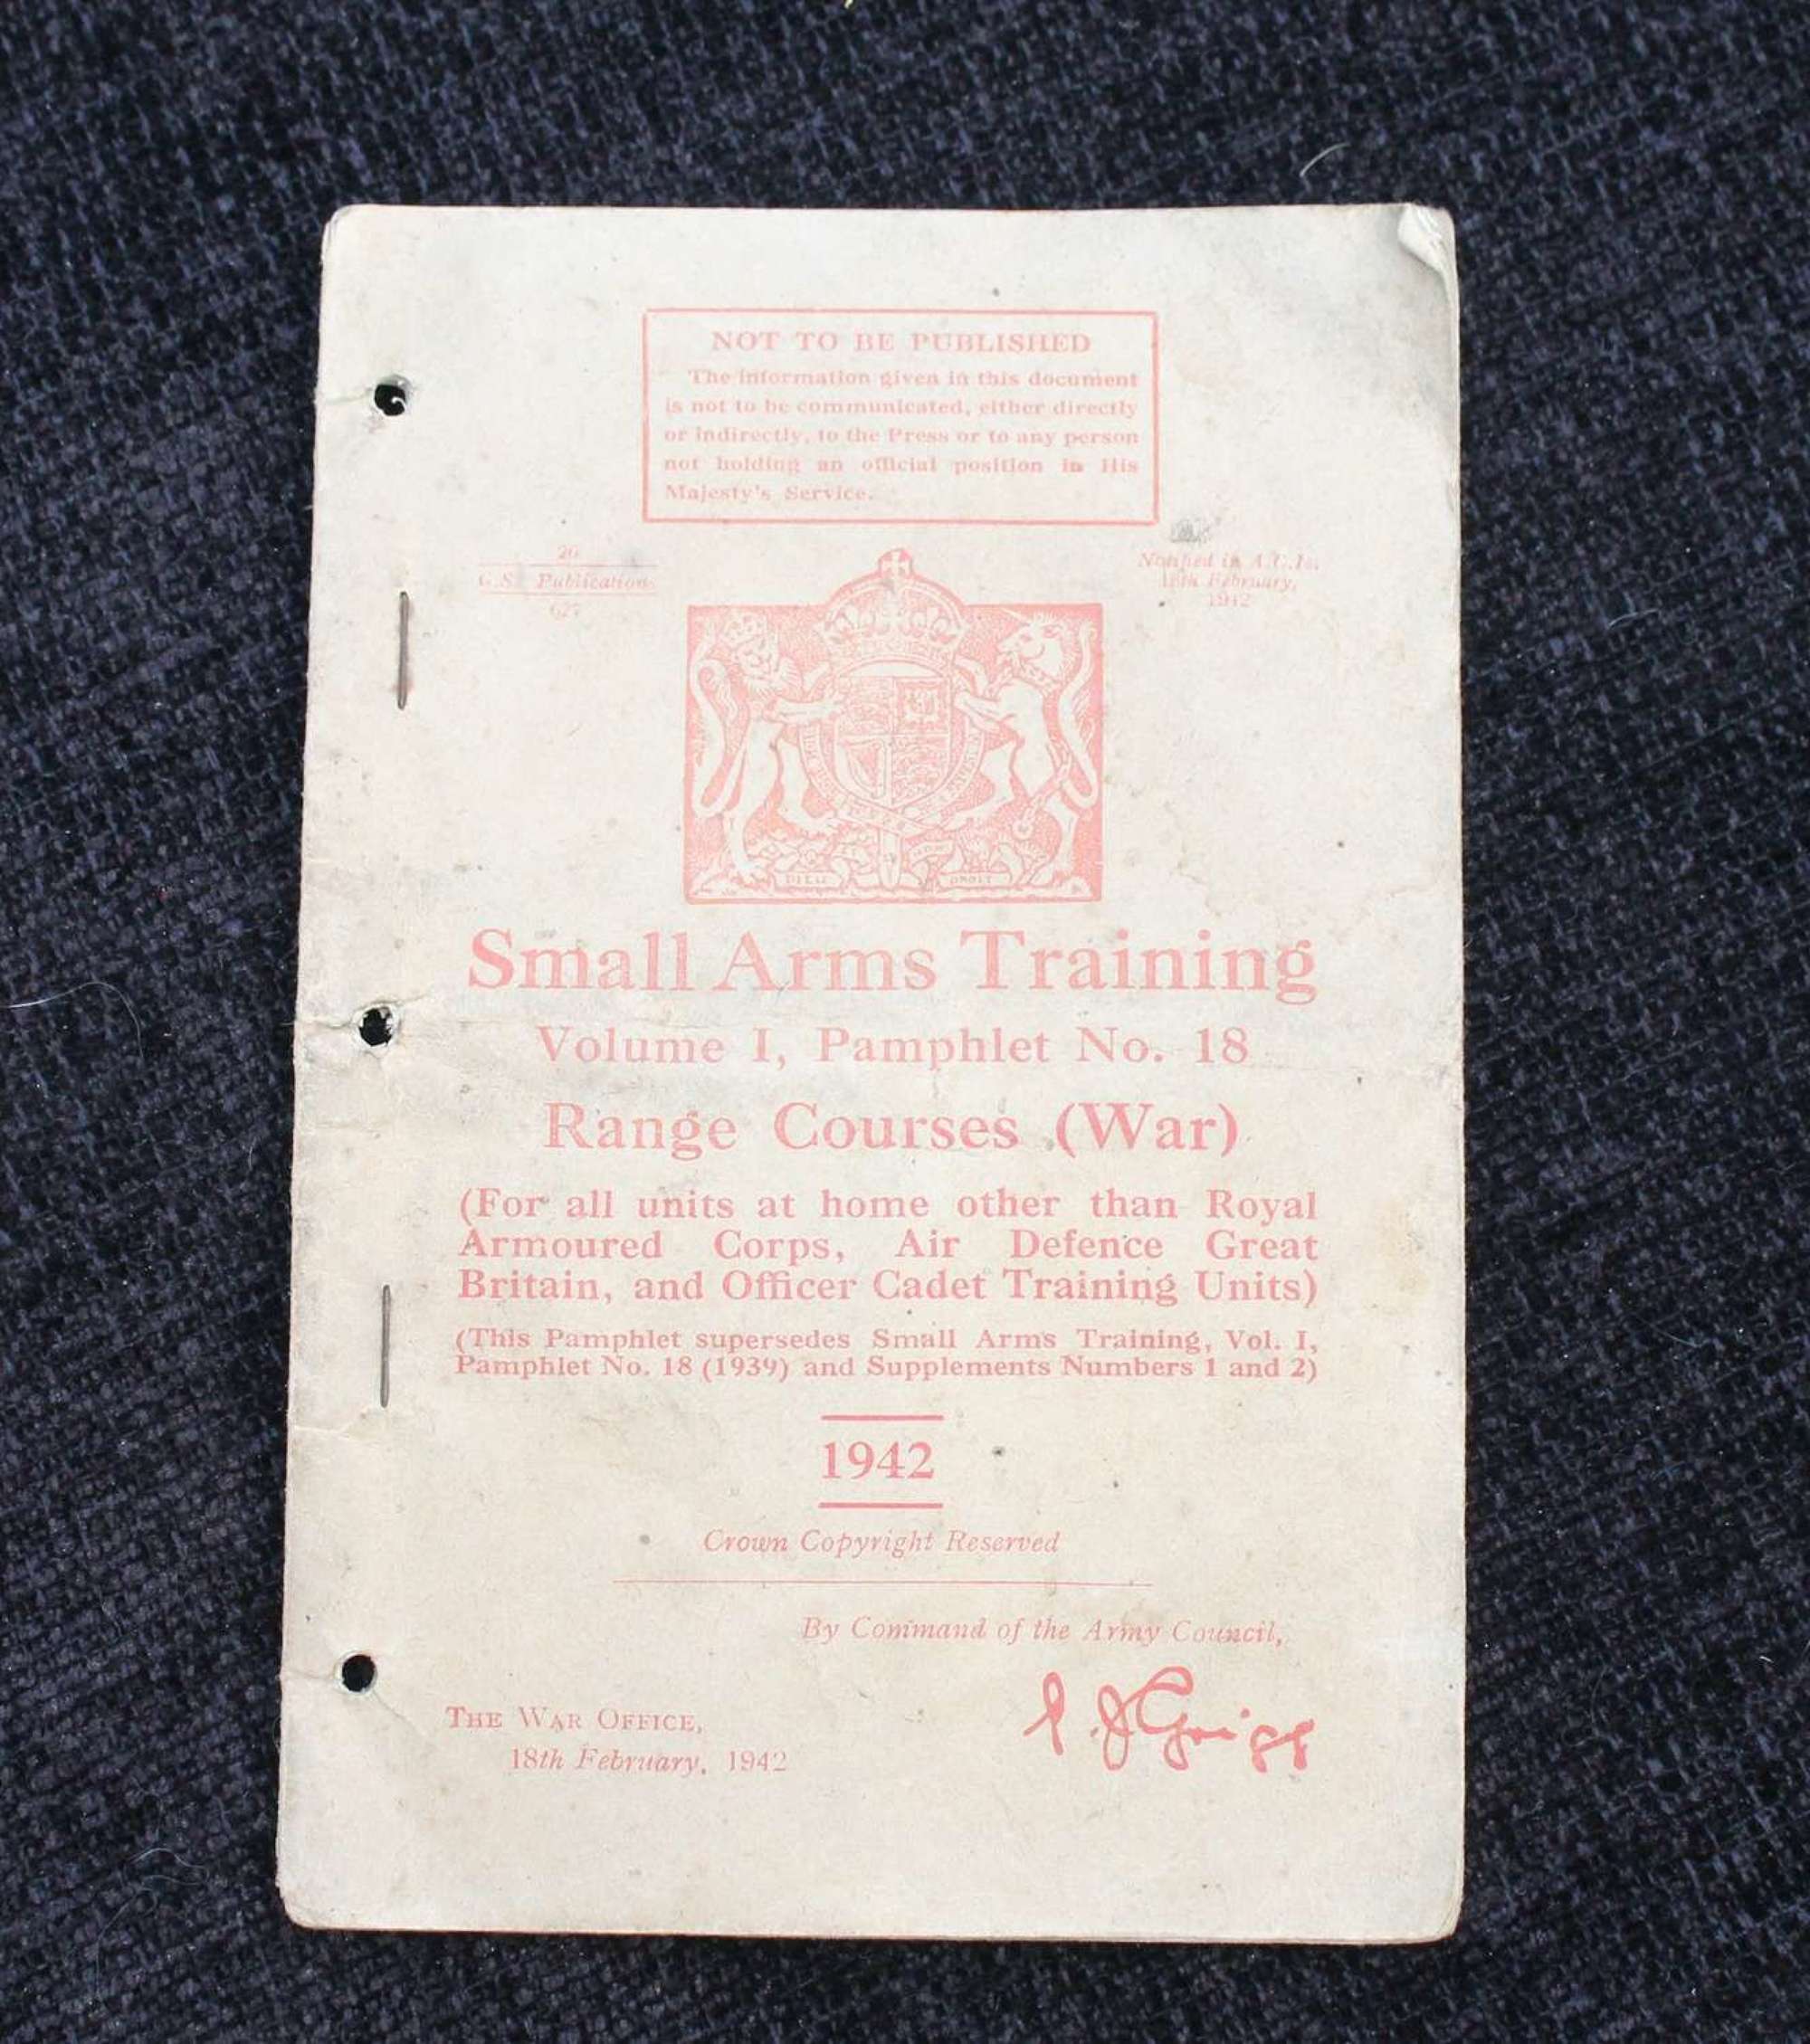 Small Arms Training Vol 1 Pamphlet 18 Range Courses 1942